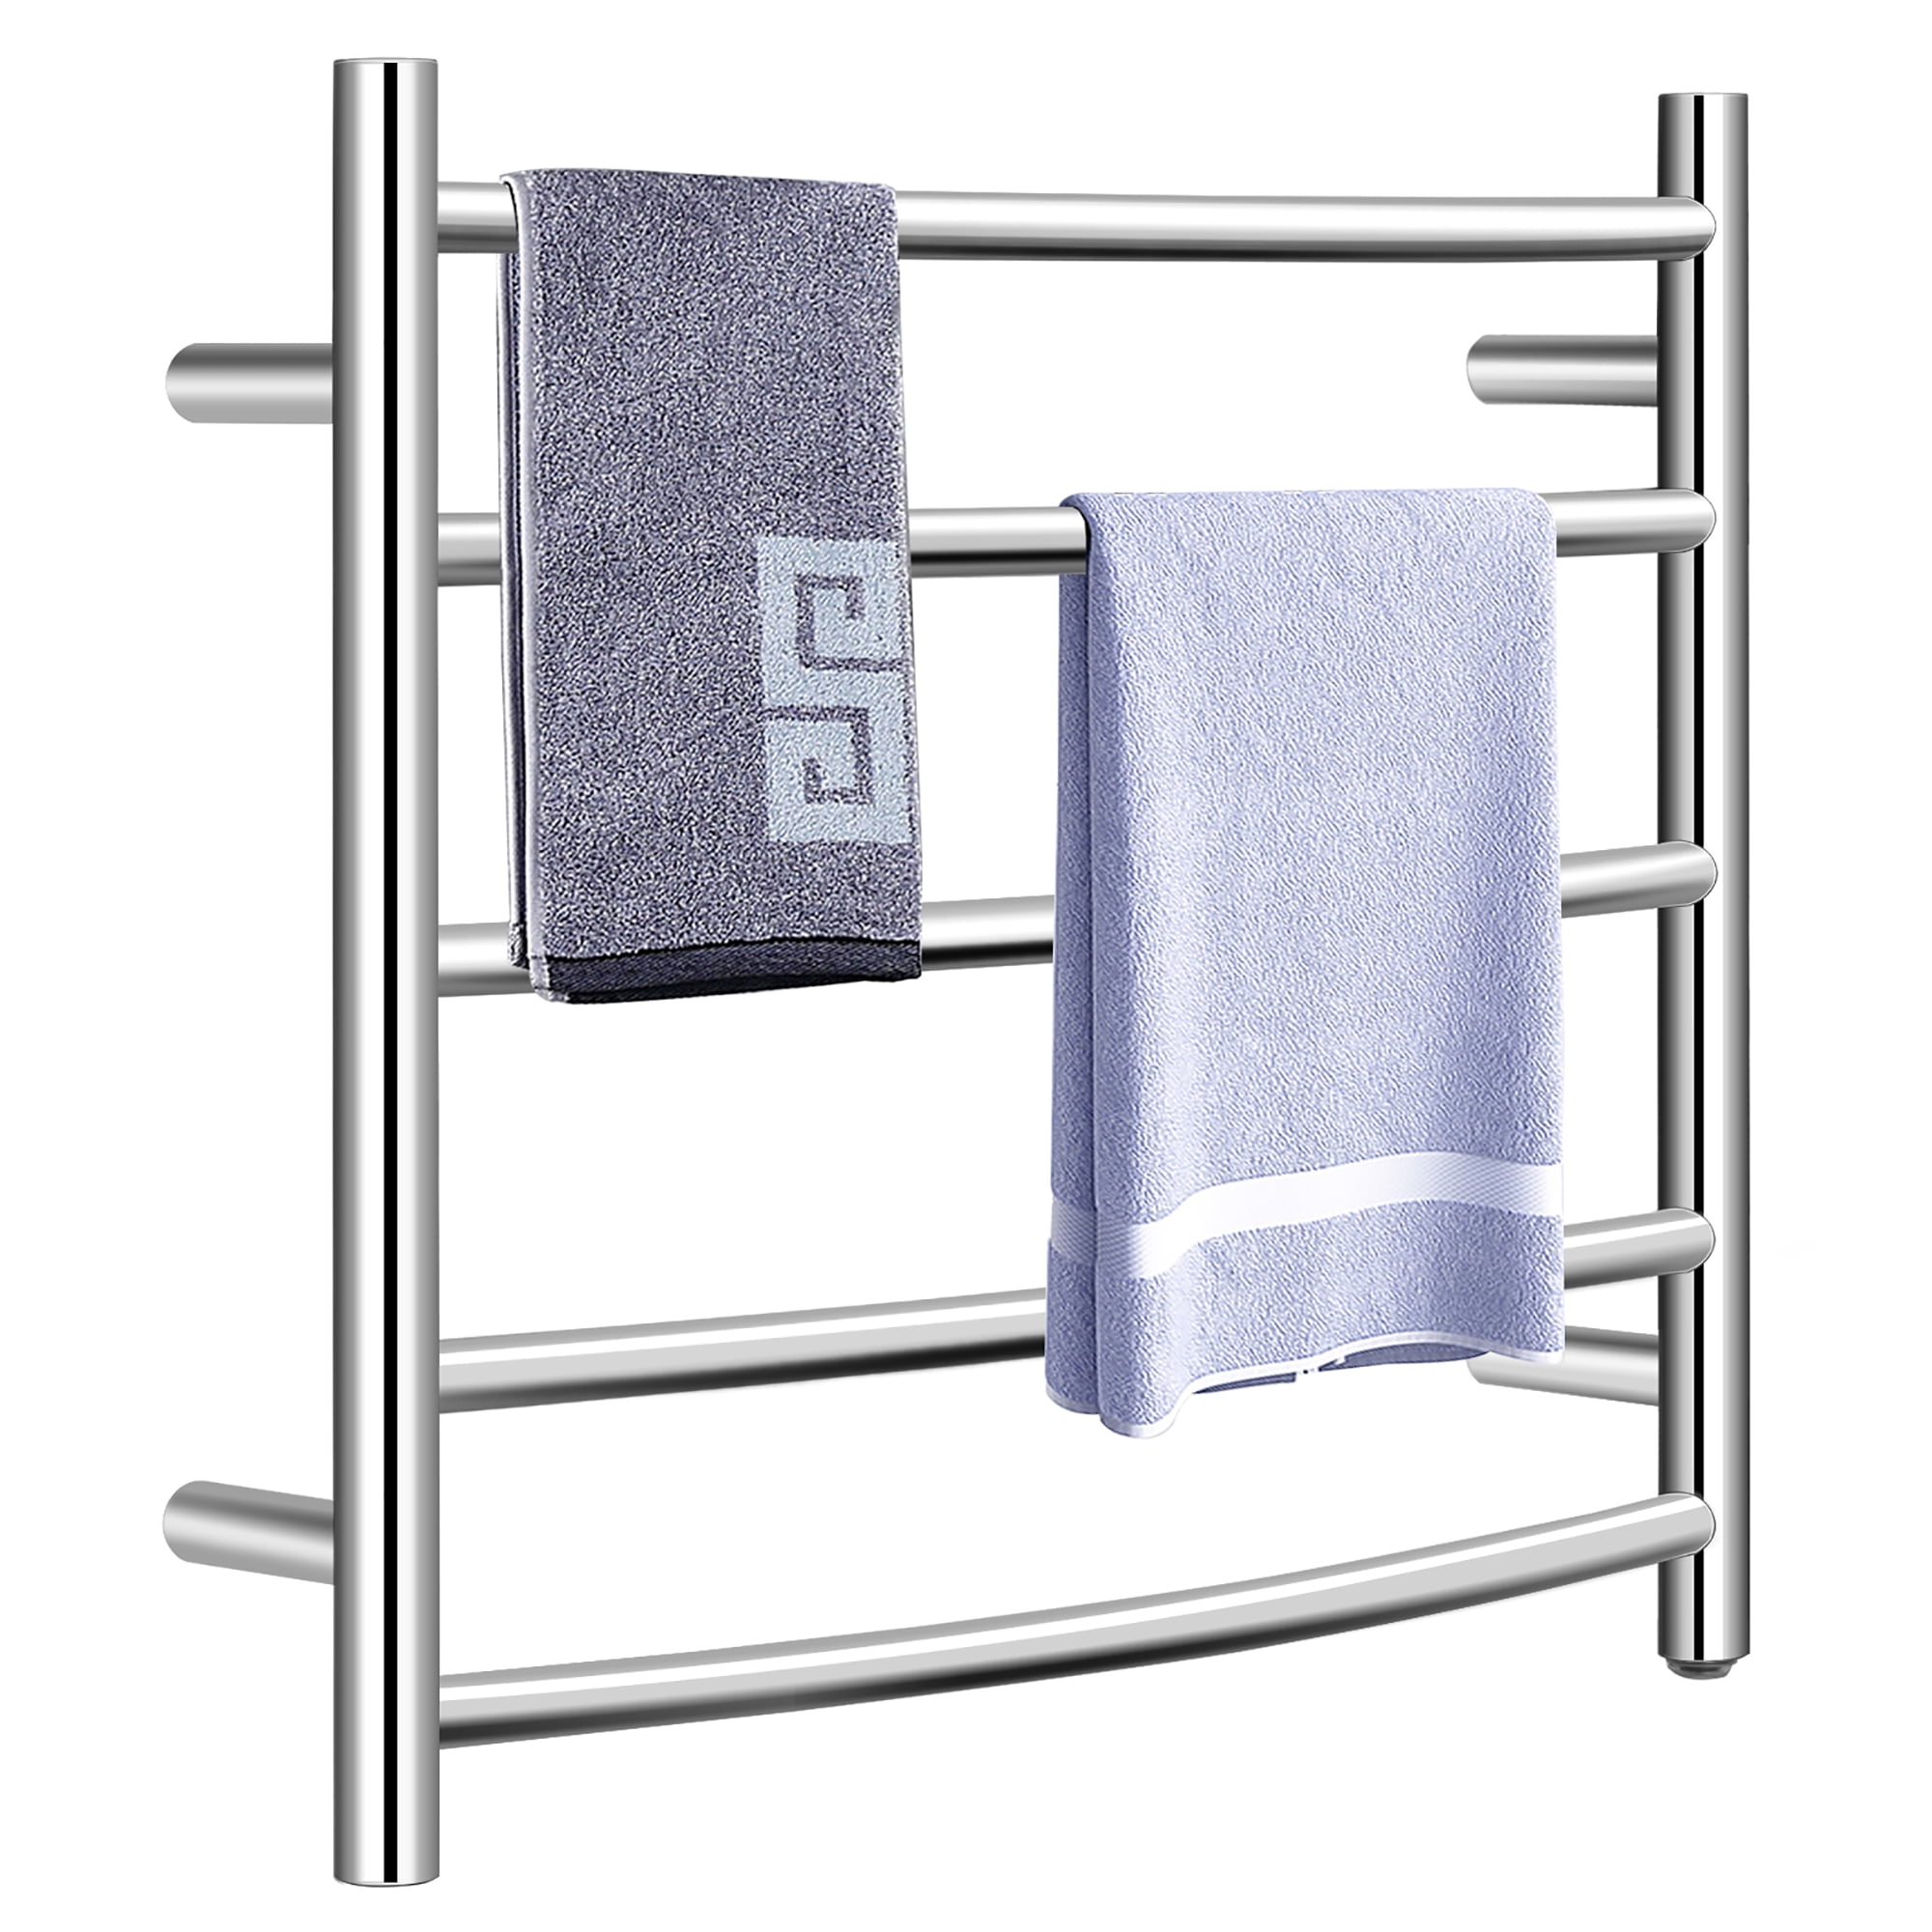  Electric Towel Warmer, Rose Gold Heated Towel Rack with 10 Bars  304 Stainless Steel Electric Drying Rack Wall Mounted Bath Towel Heater,  Clothes Airer Dryer for Bathroom, 80×50cm,H () : Home